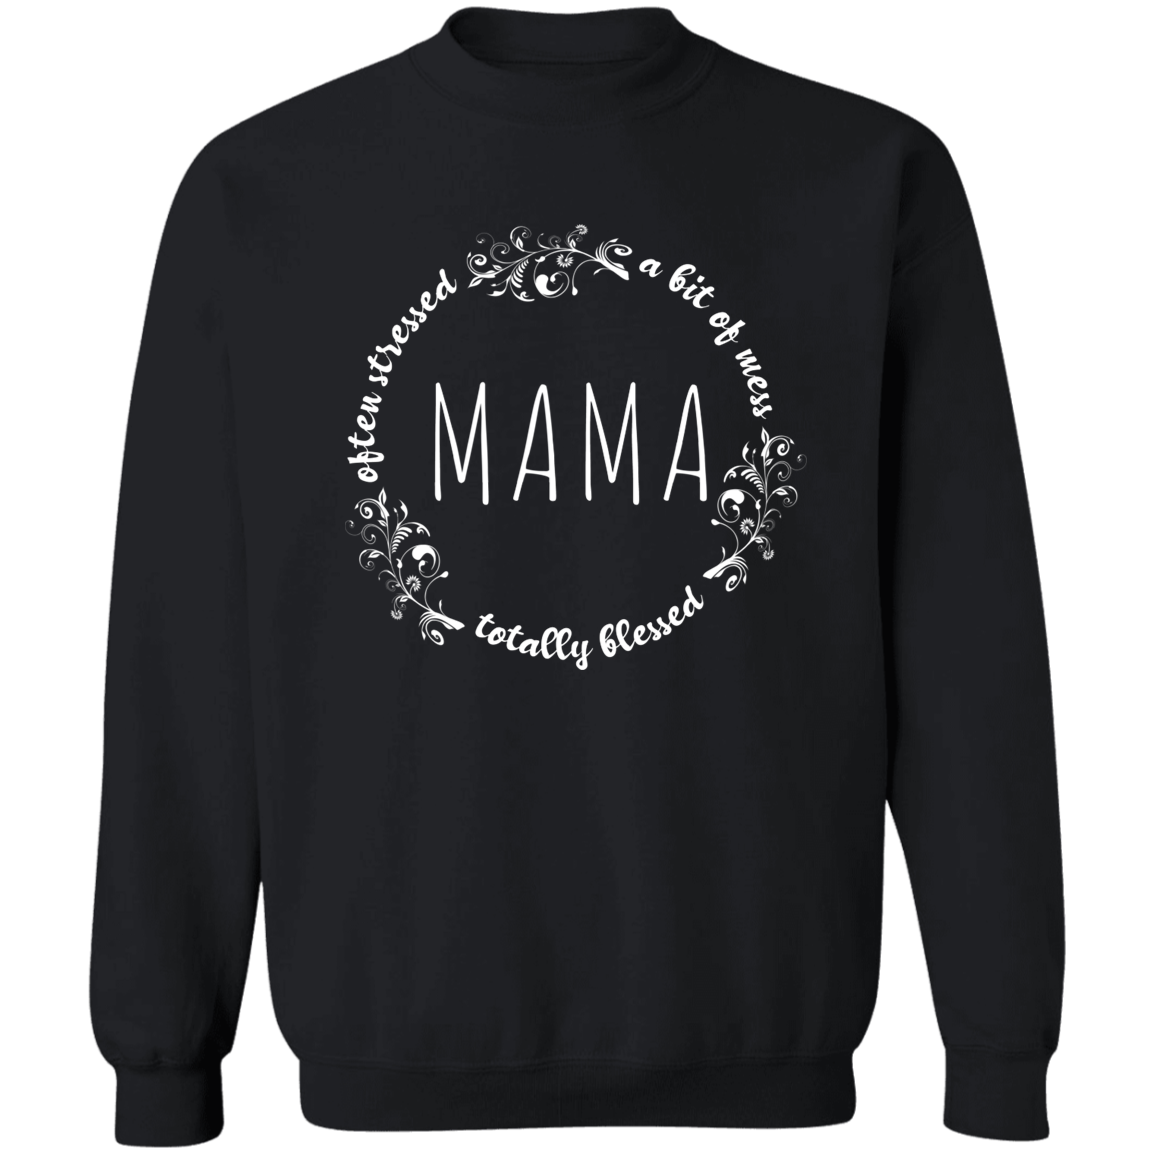 Often Stressed A Bit of A Mess But Totally Blessed Mama T-Shirt, Sweatshirt, Hoodie